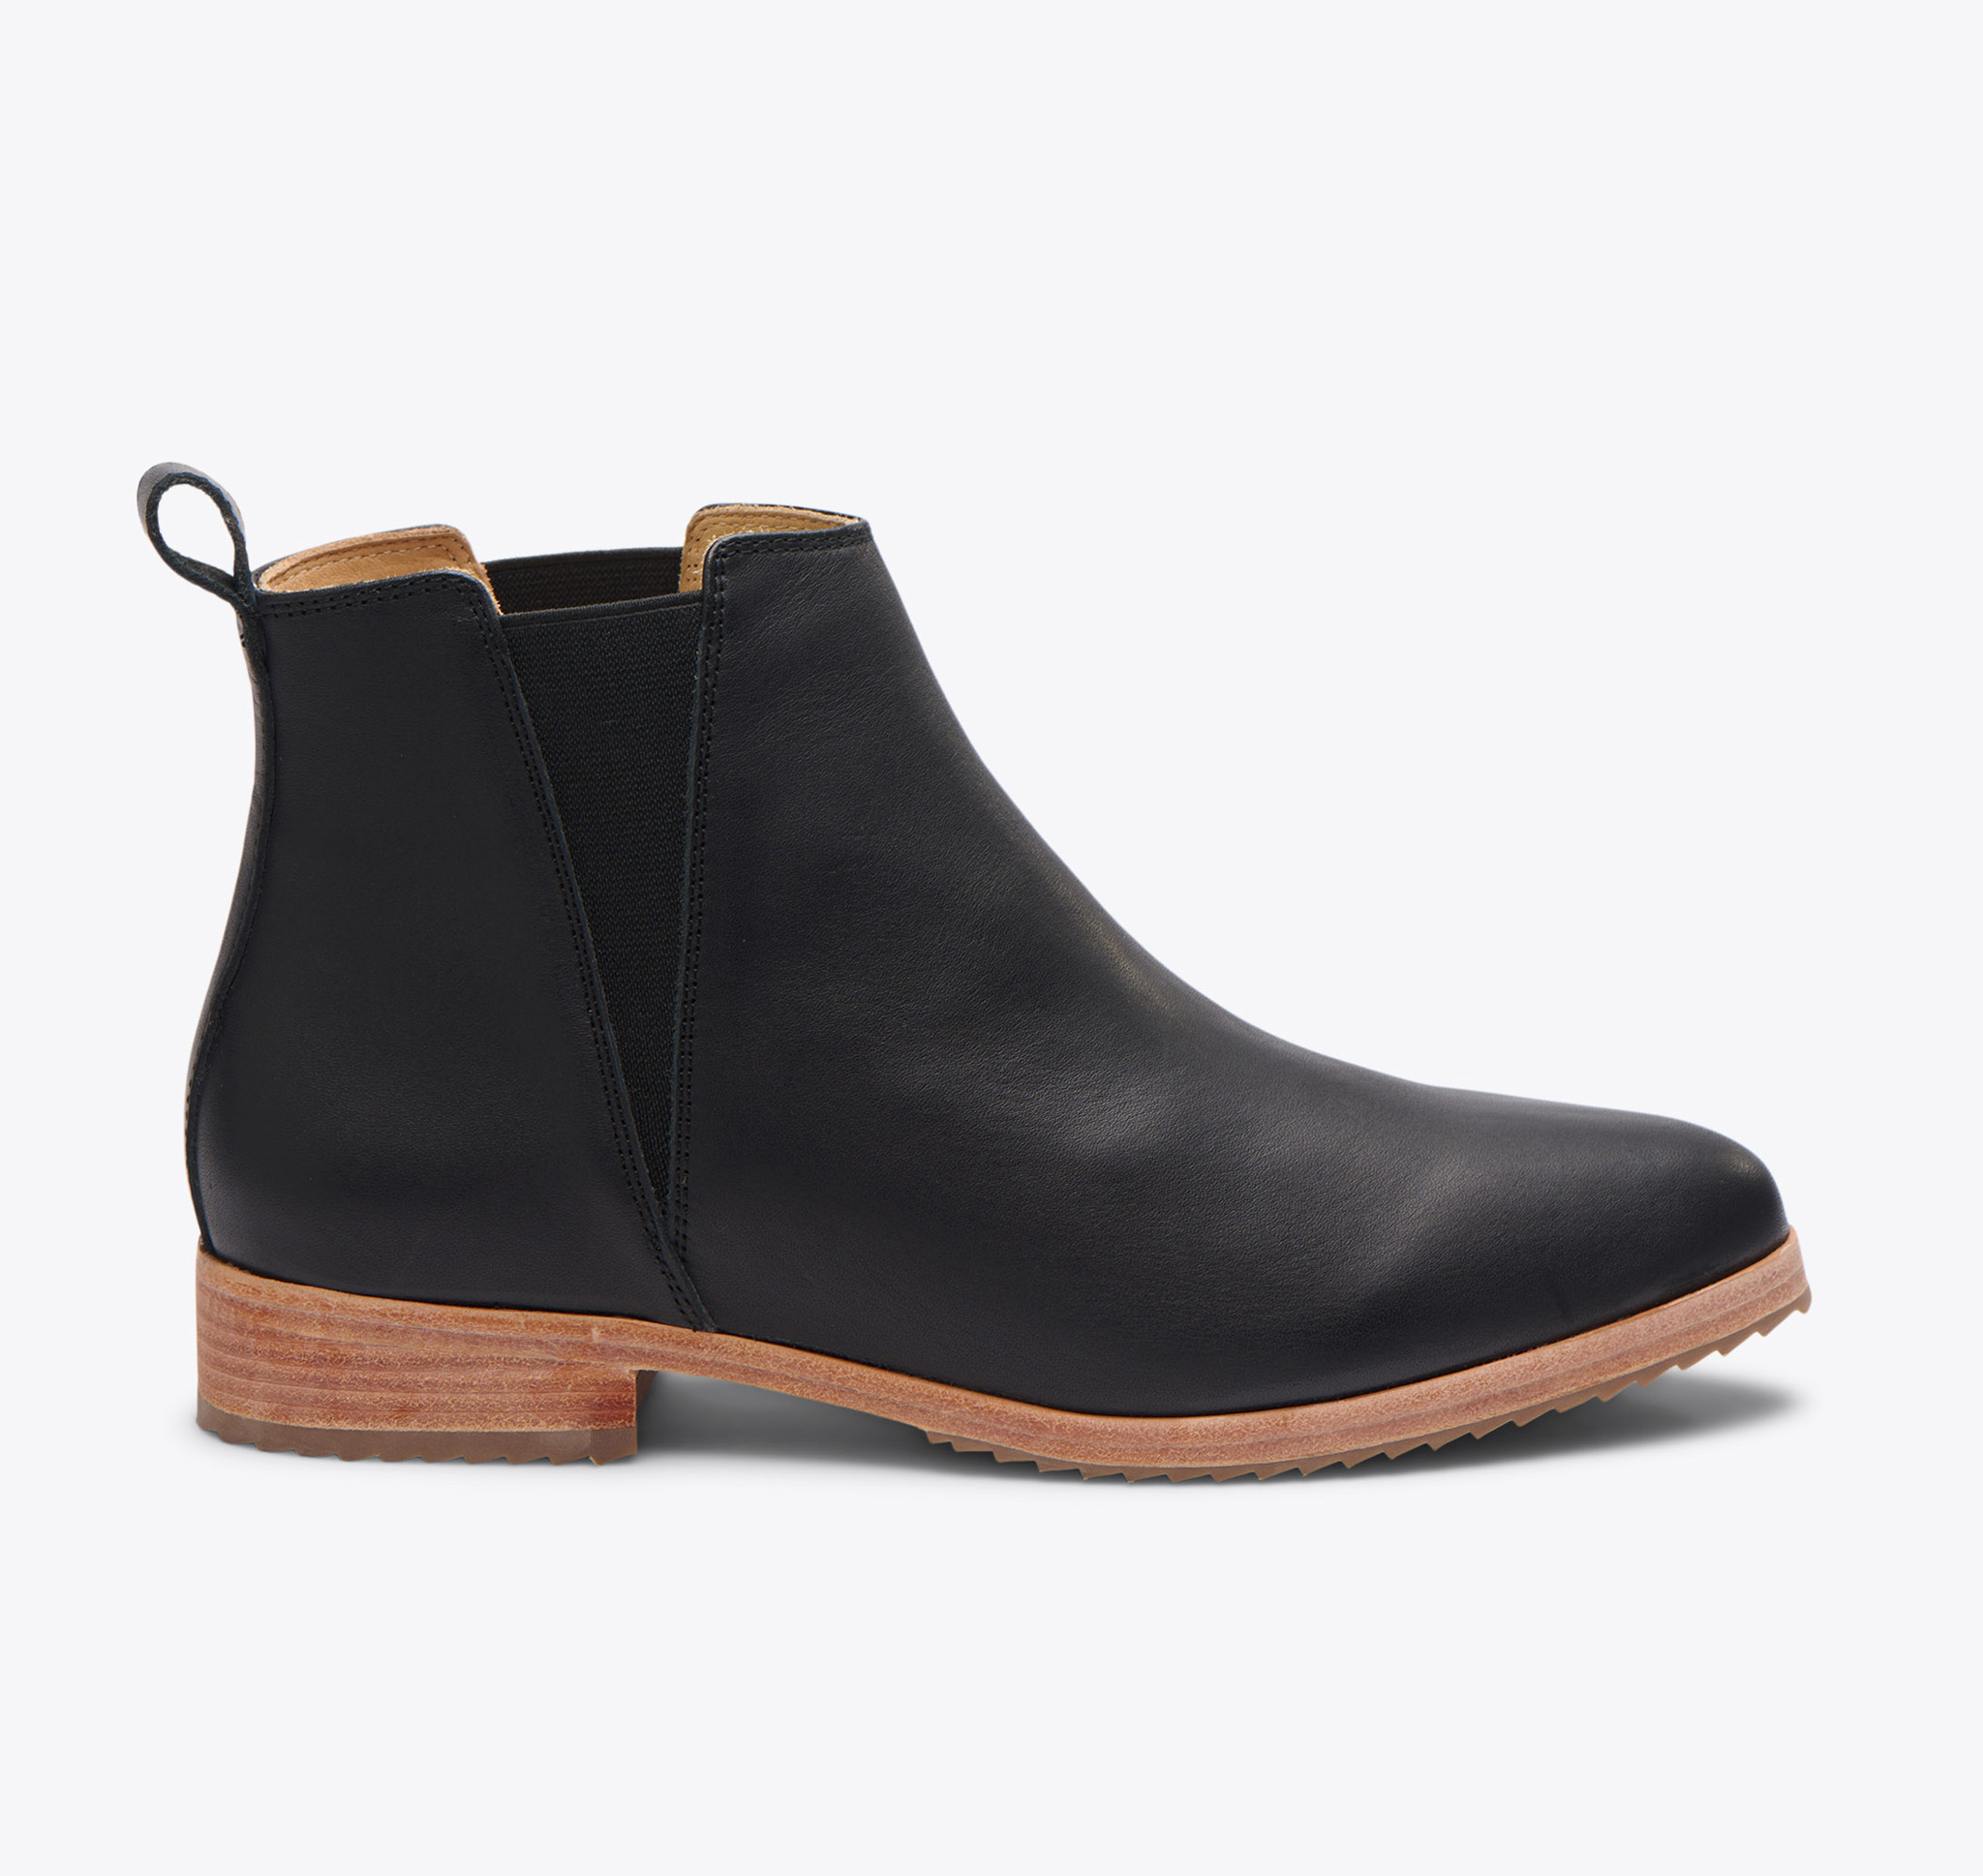 Nisolo Classic Chelsea Boot Black - Every Nisolo product is built on the foundation of comfort, function, and design. 